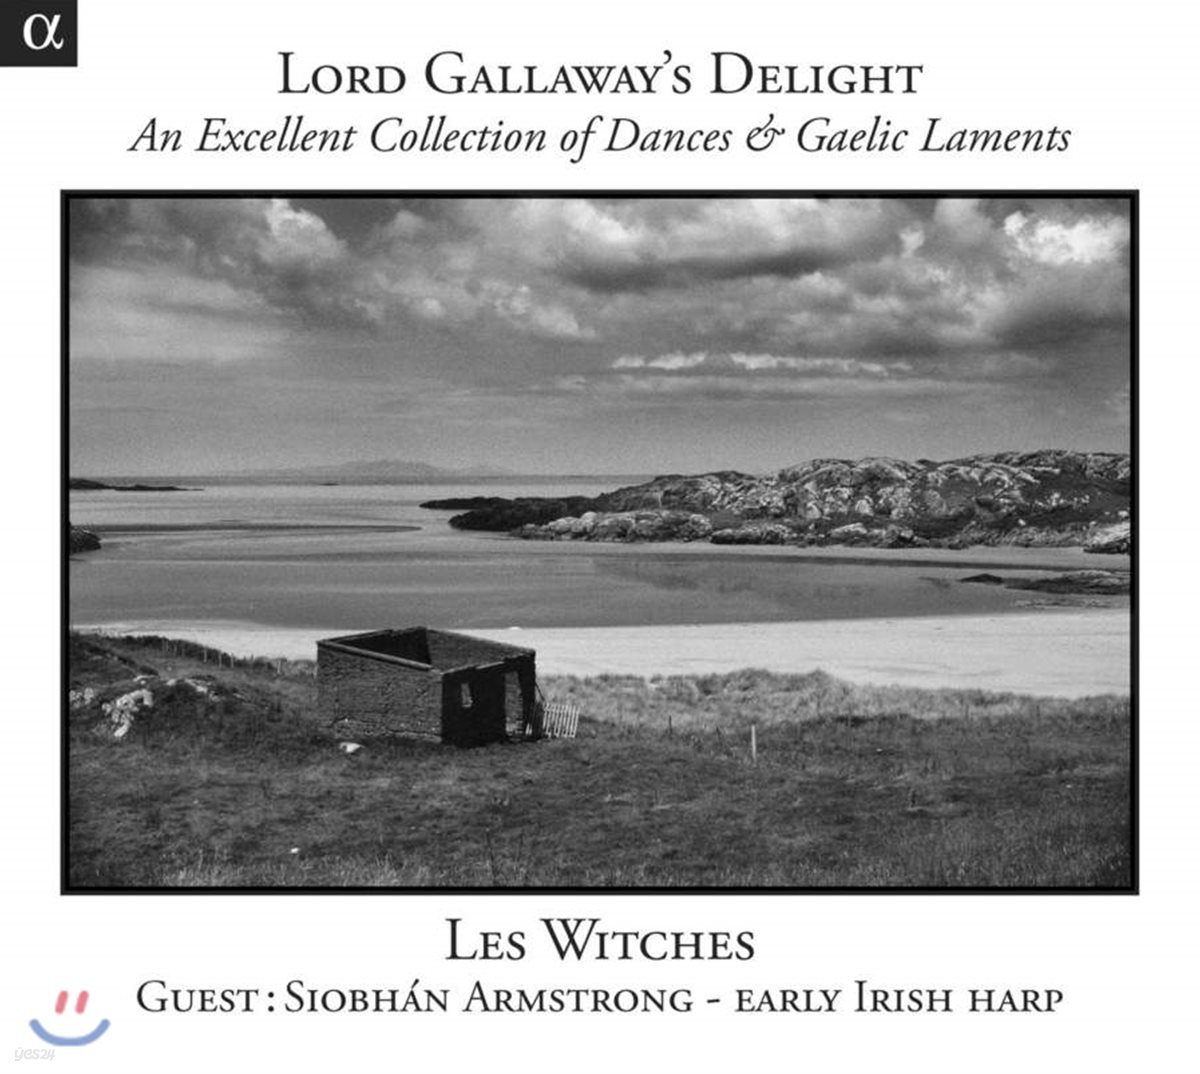 Les Witches 갤러웨이 경의 기쁨 - 16, 17세기 켈트 춤곡과 라멘트 (Lord Gallaway&#39;s Delight - An Excellent Collection of Dances and Gaelic Laments)